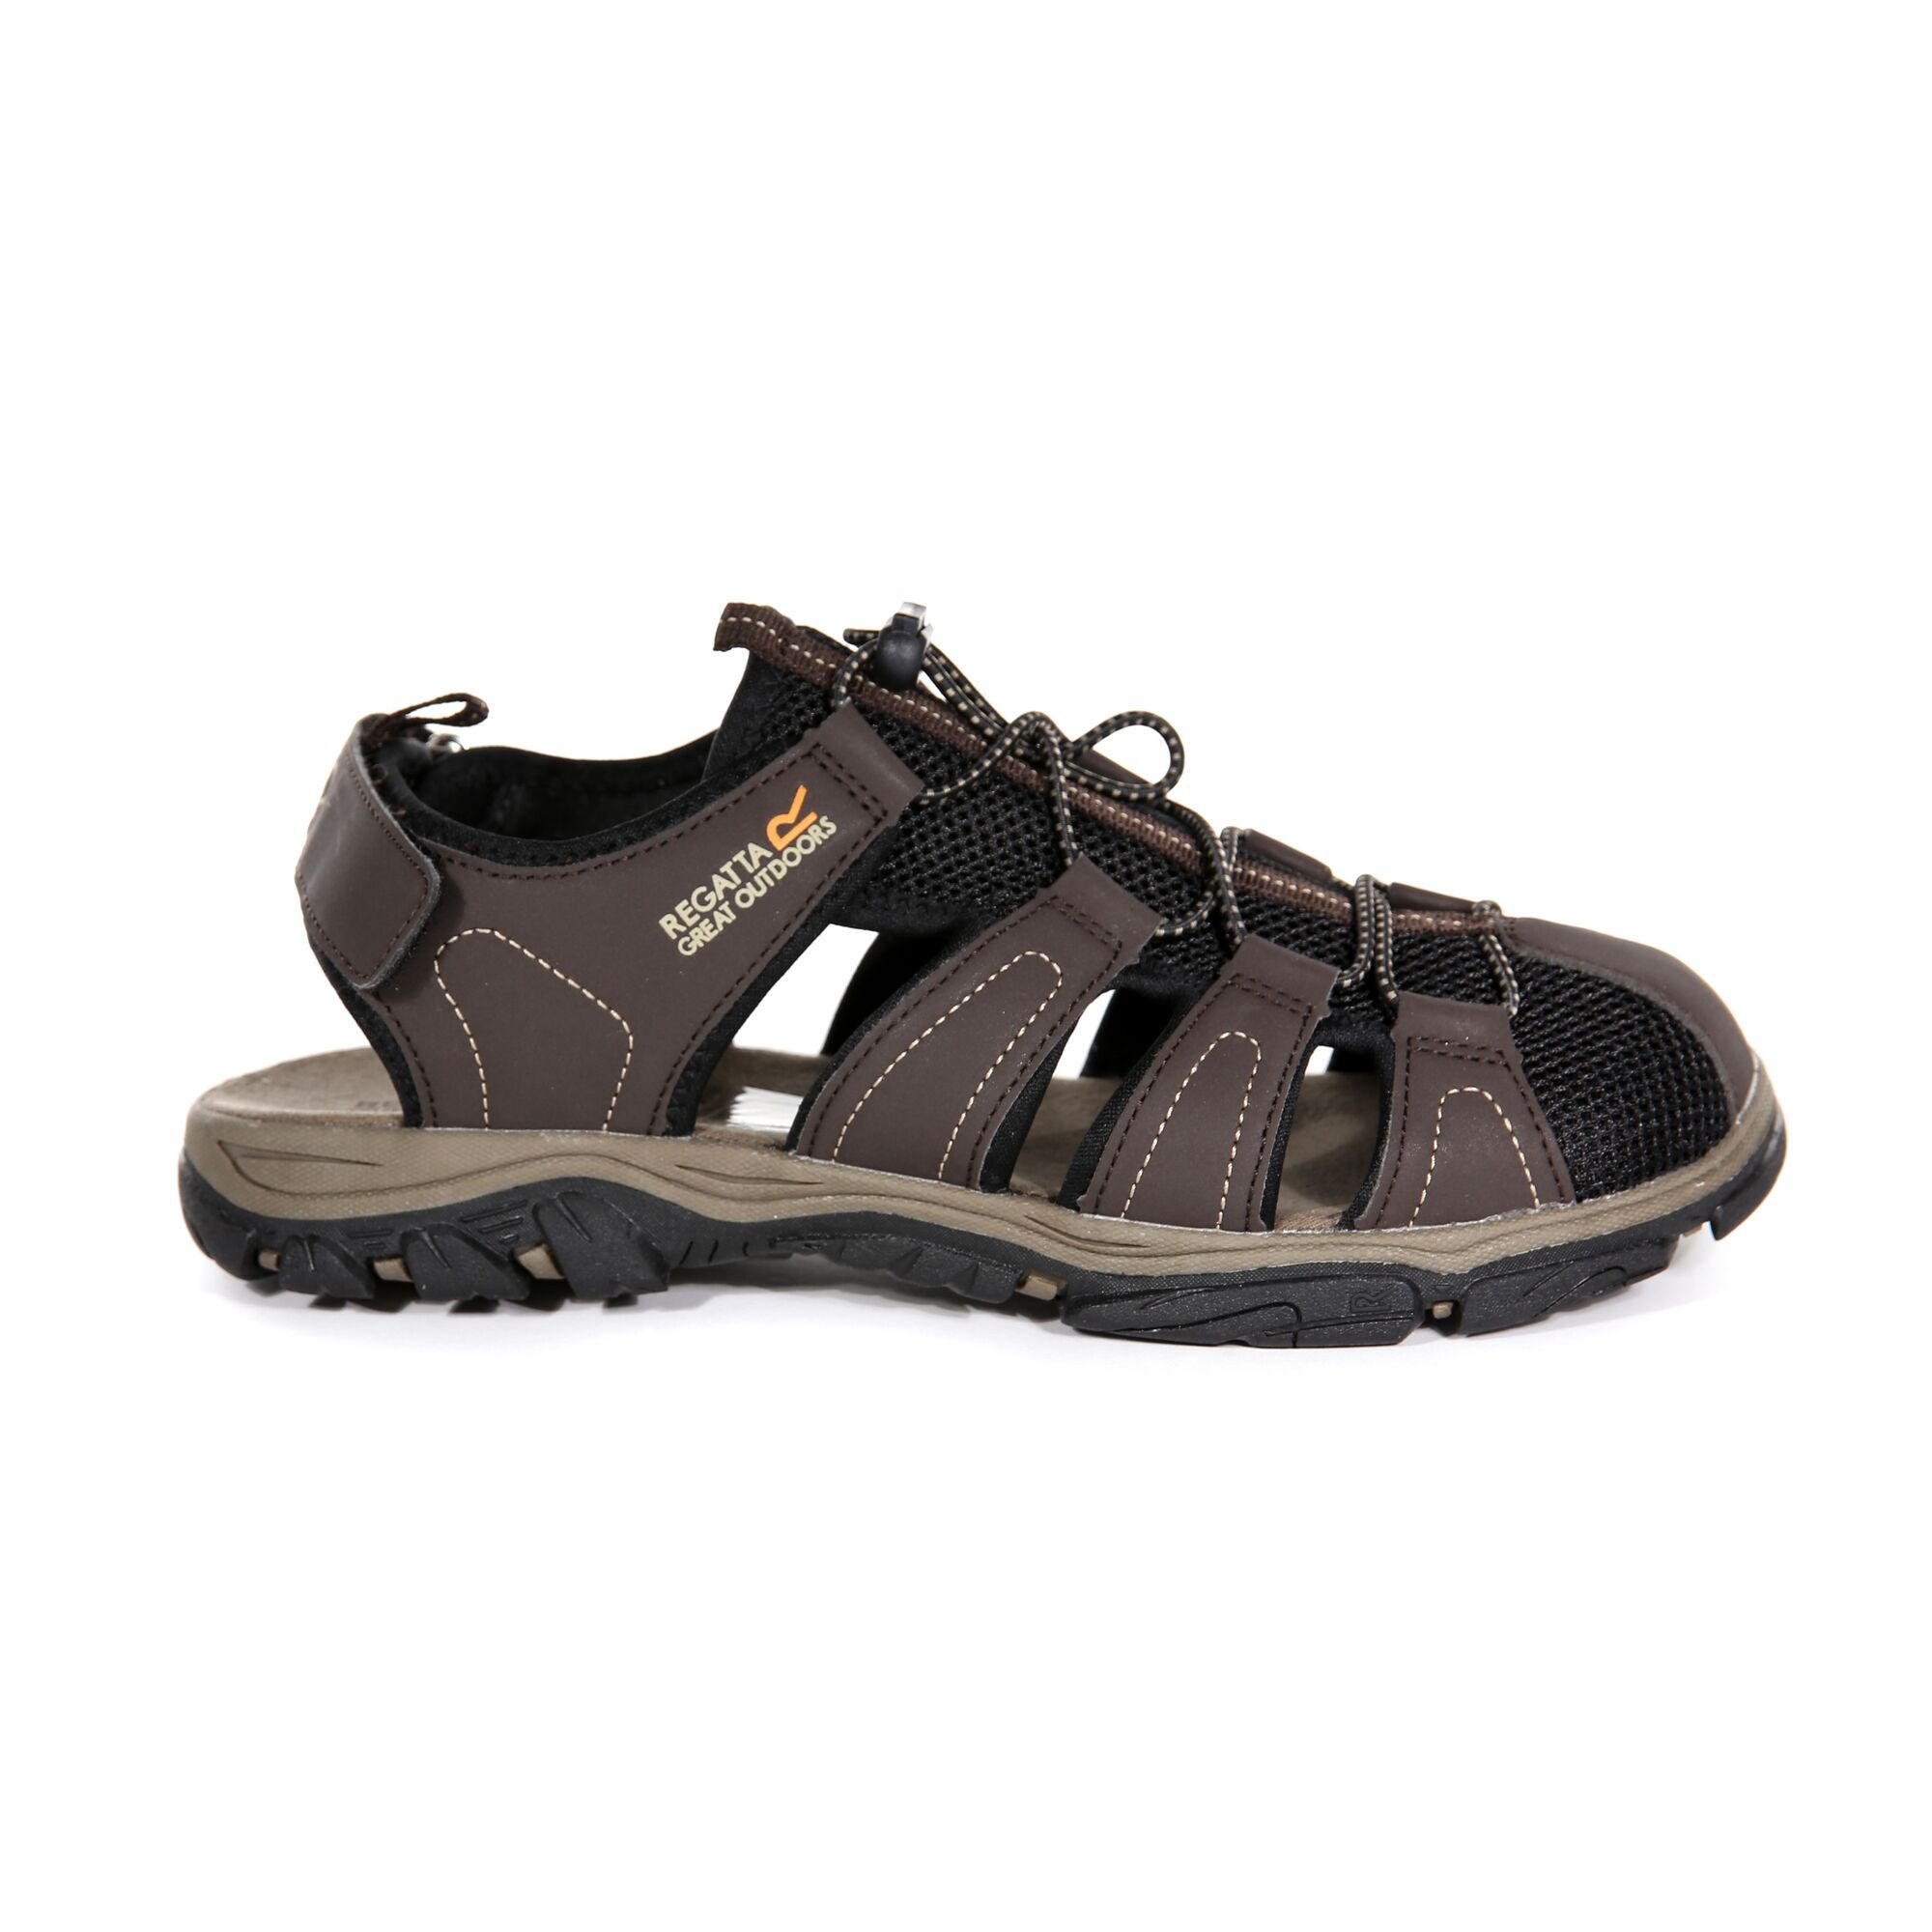 90% Polyurathane, 10% Polyester. PU and air mesh upper. Spandex lining for extra comfort and a positive fit. Toe bumper construction for added protection. Adjustable shockcord fastening and backstrap. Water friendly comfort EVA footbed.